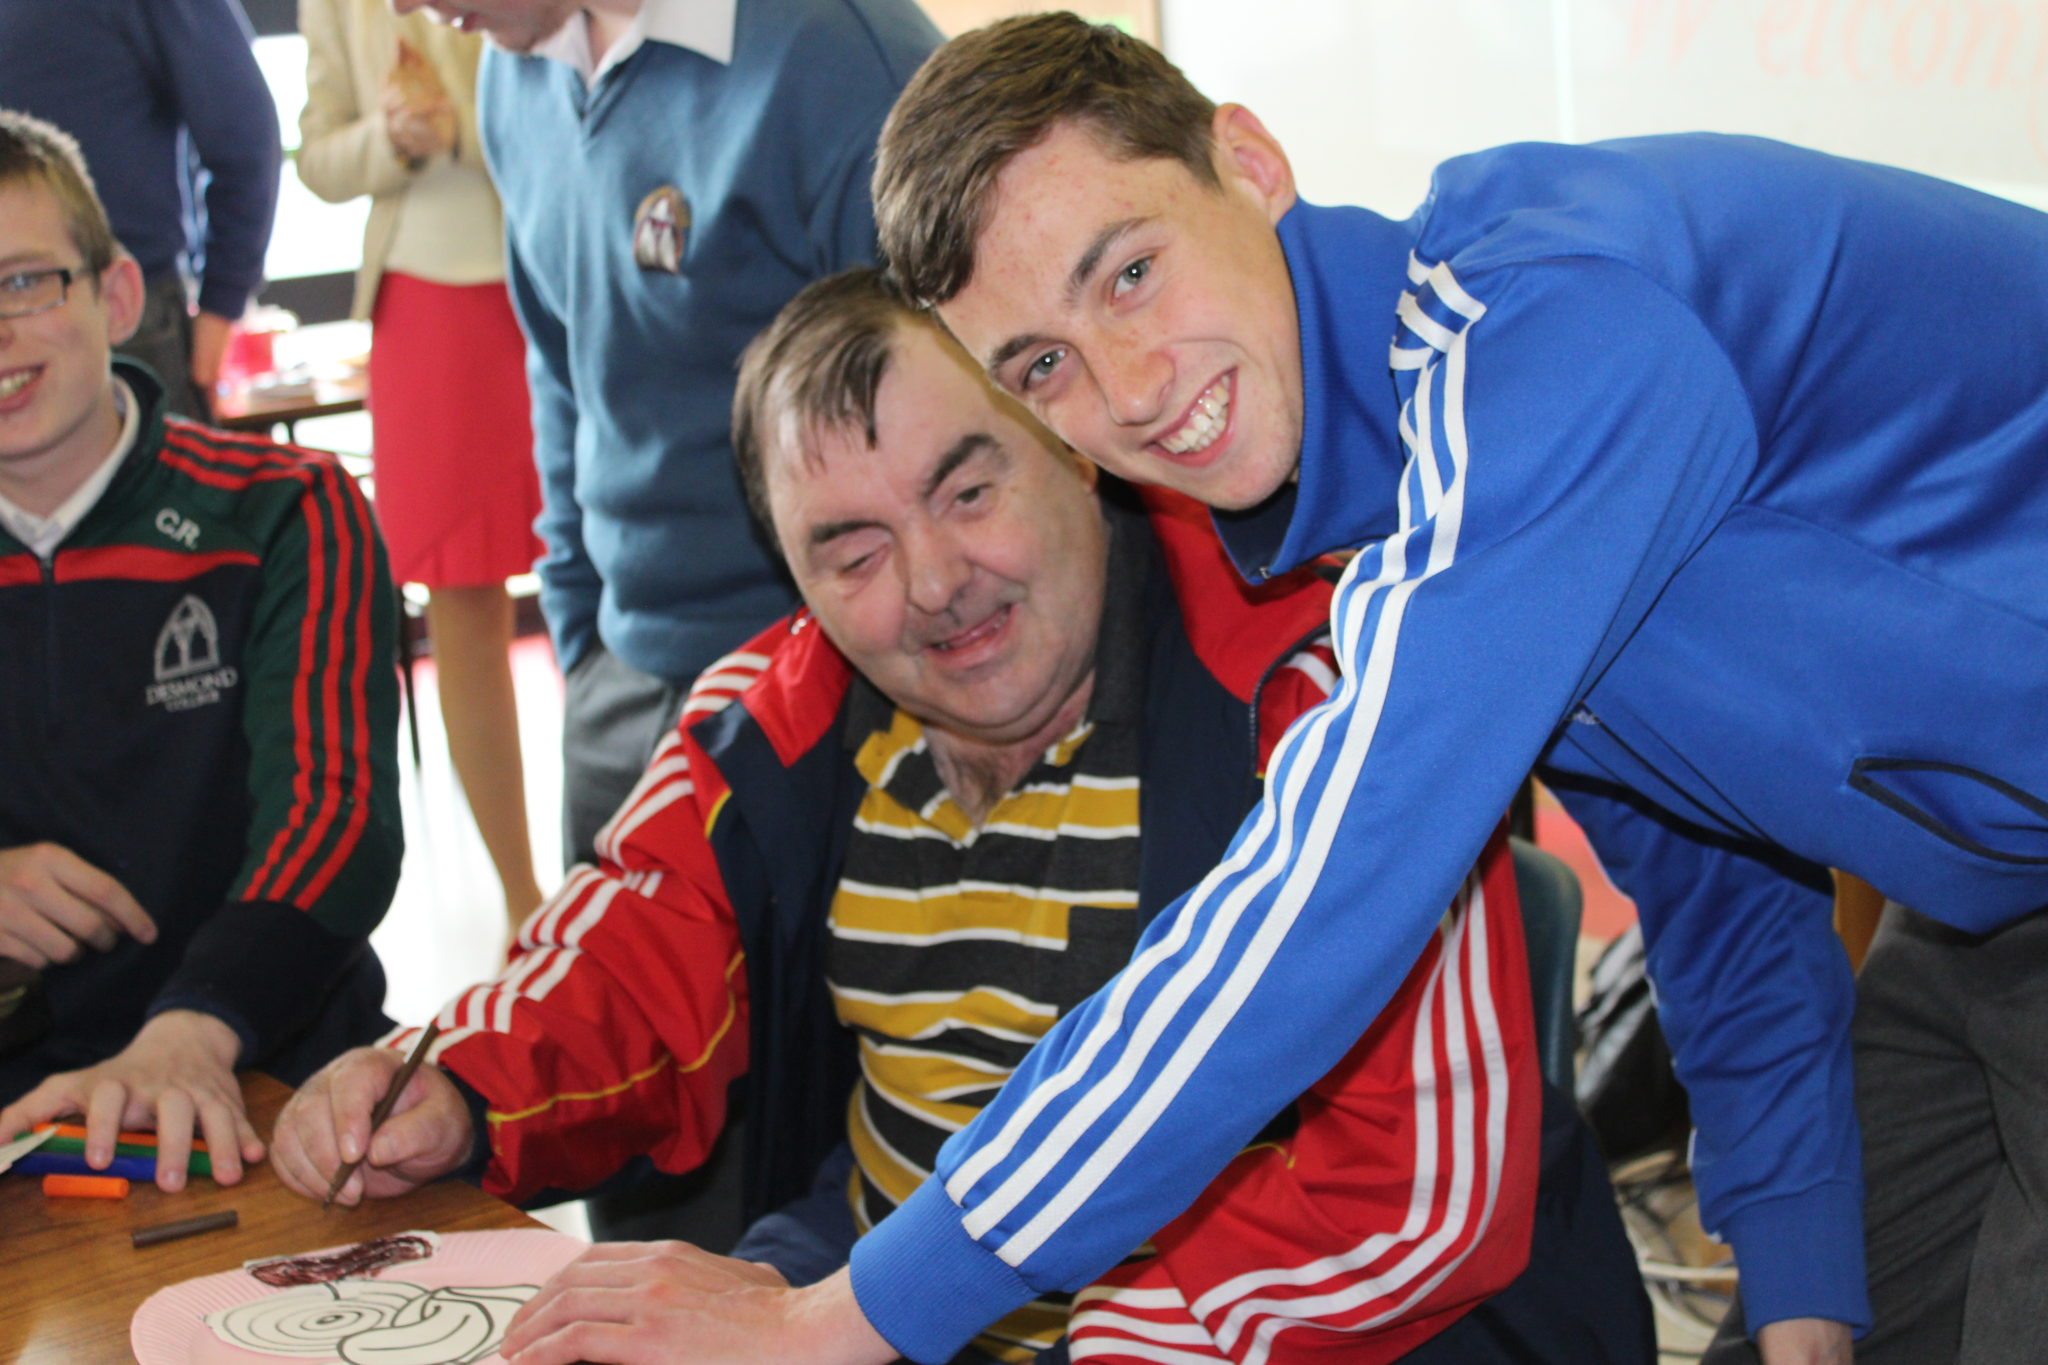 May 2015: Transition Year Students from Desmond College have a party at the Brothers of Charity, NewcastleWest. Pictured: Patrick Foley and Conor Reidy